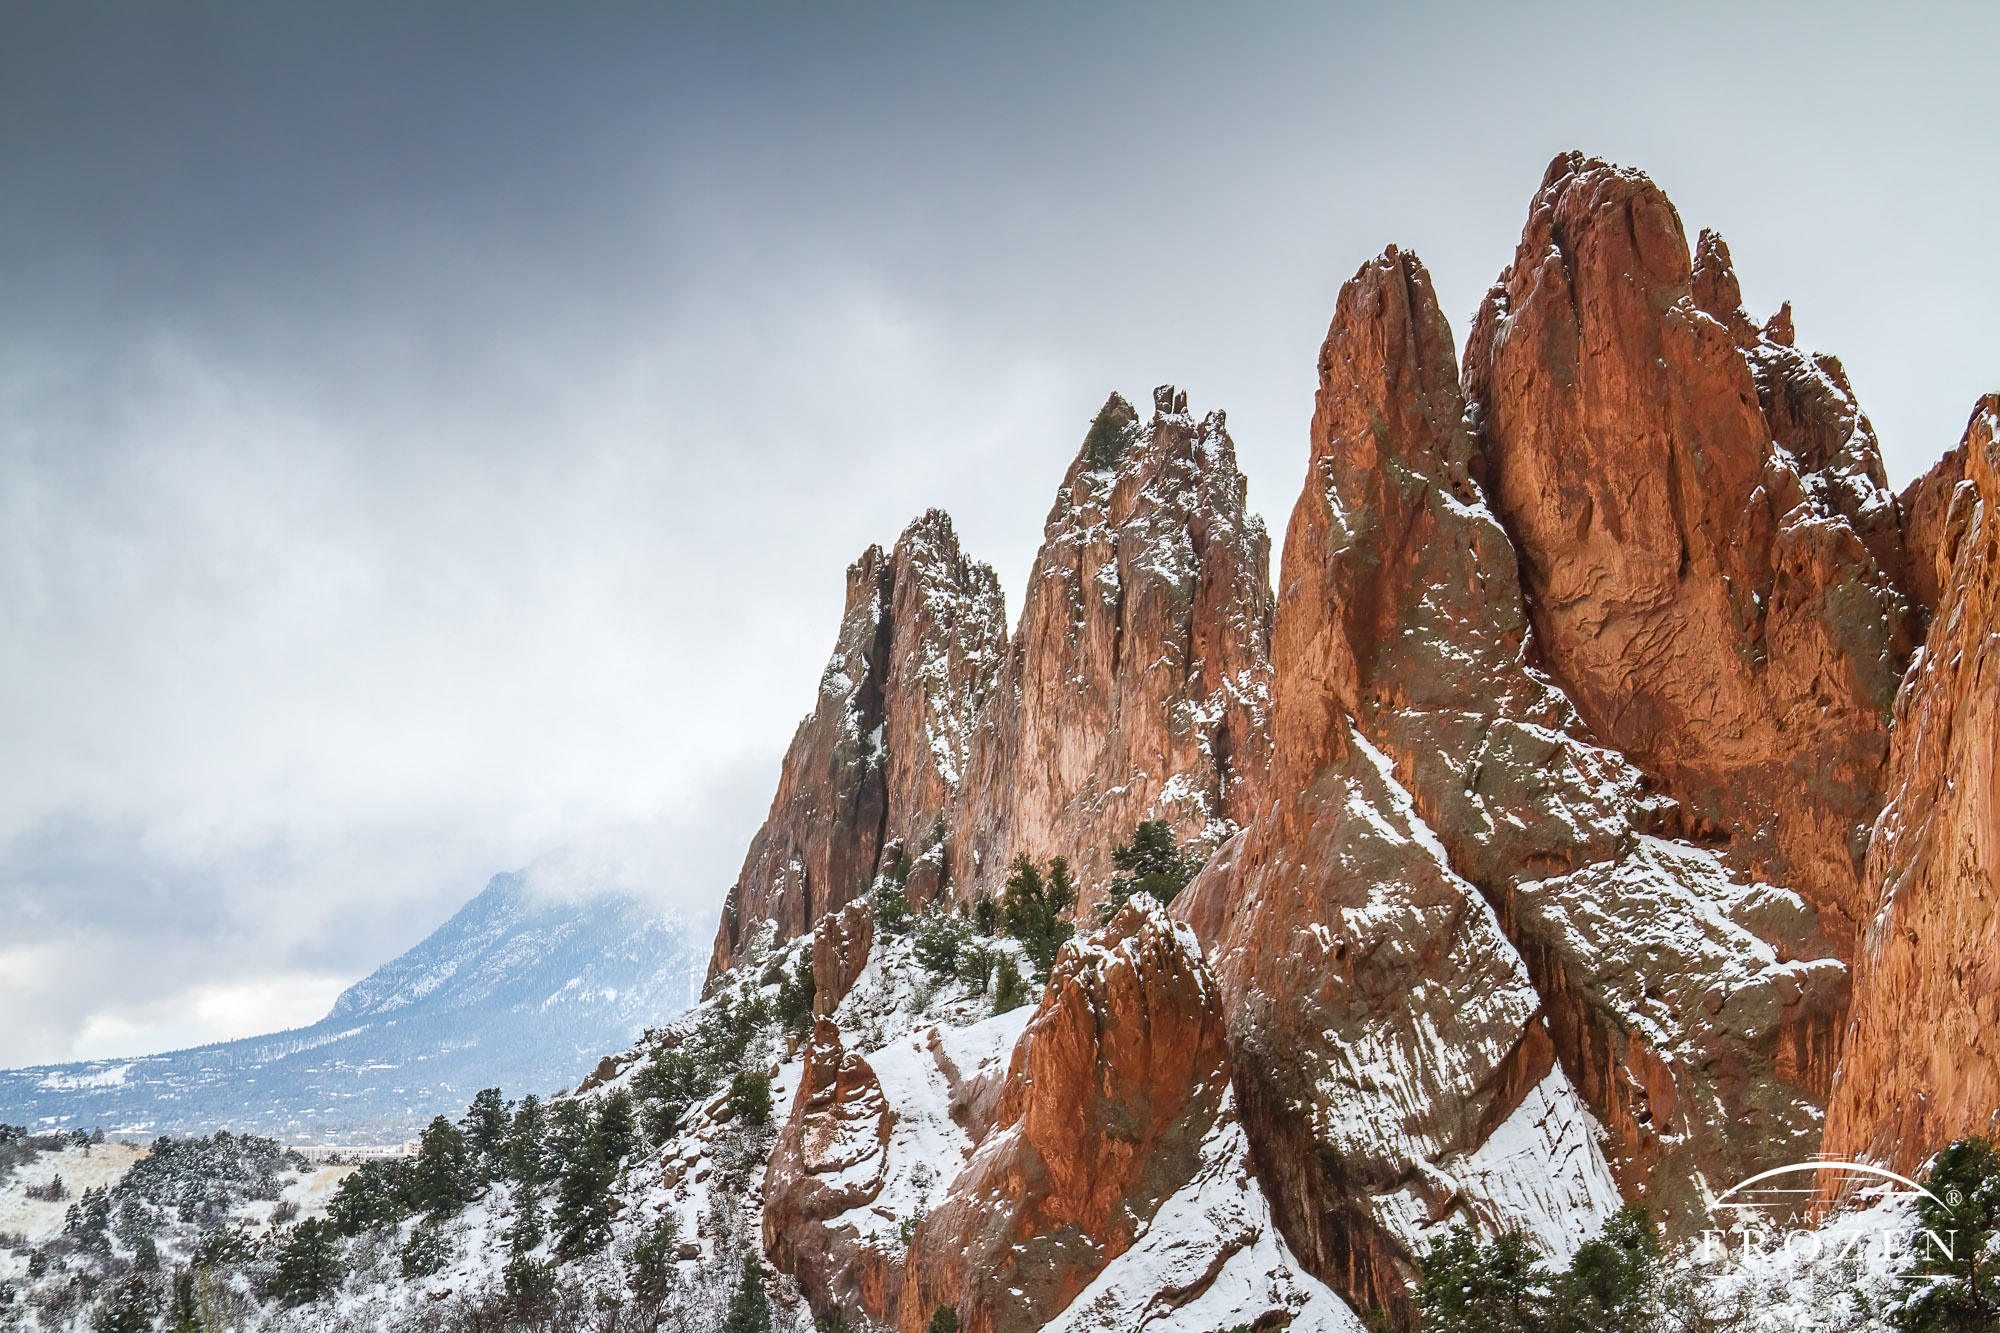 During a snowstorm featuring thundersnow, the red sandstone layers of Garden of the Gods were covered in a blanket of snow